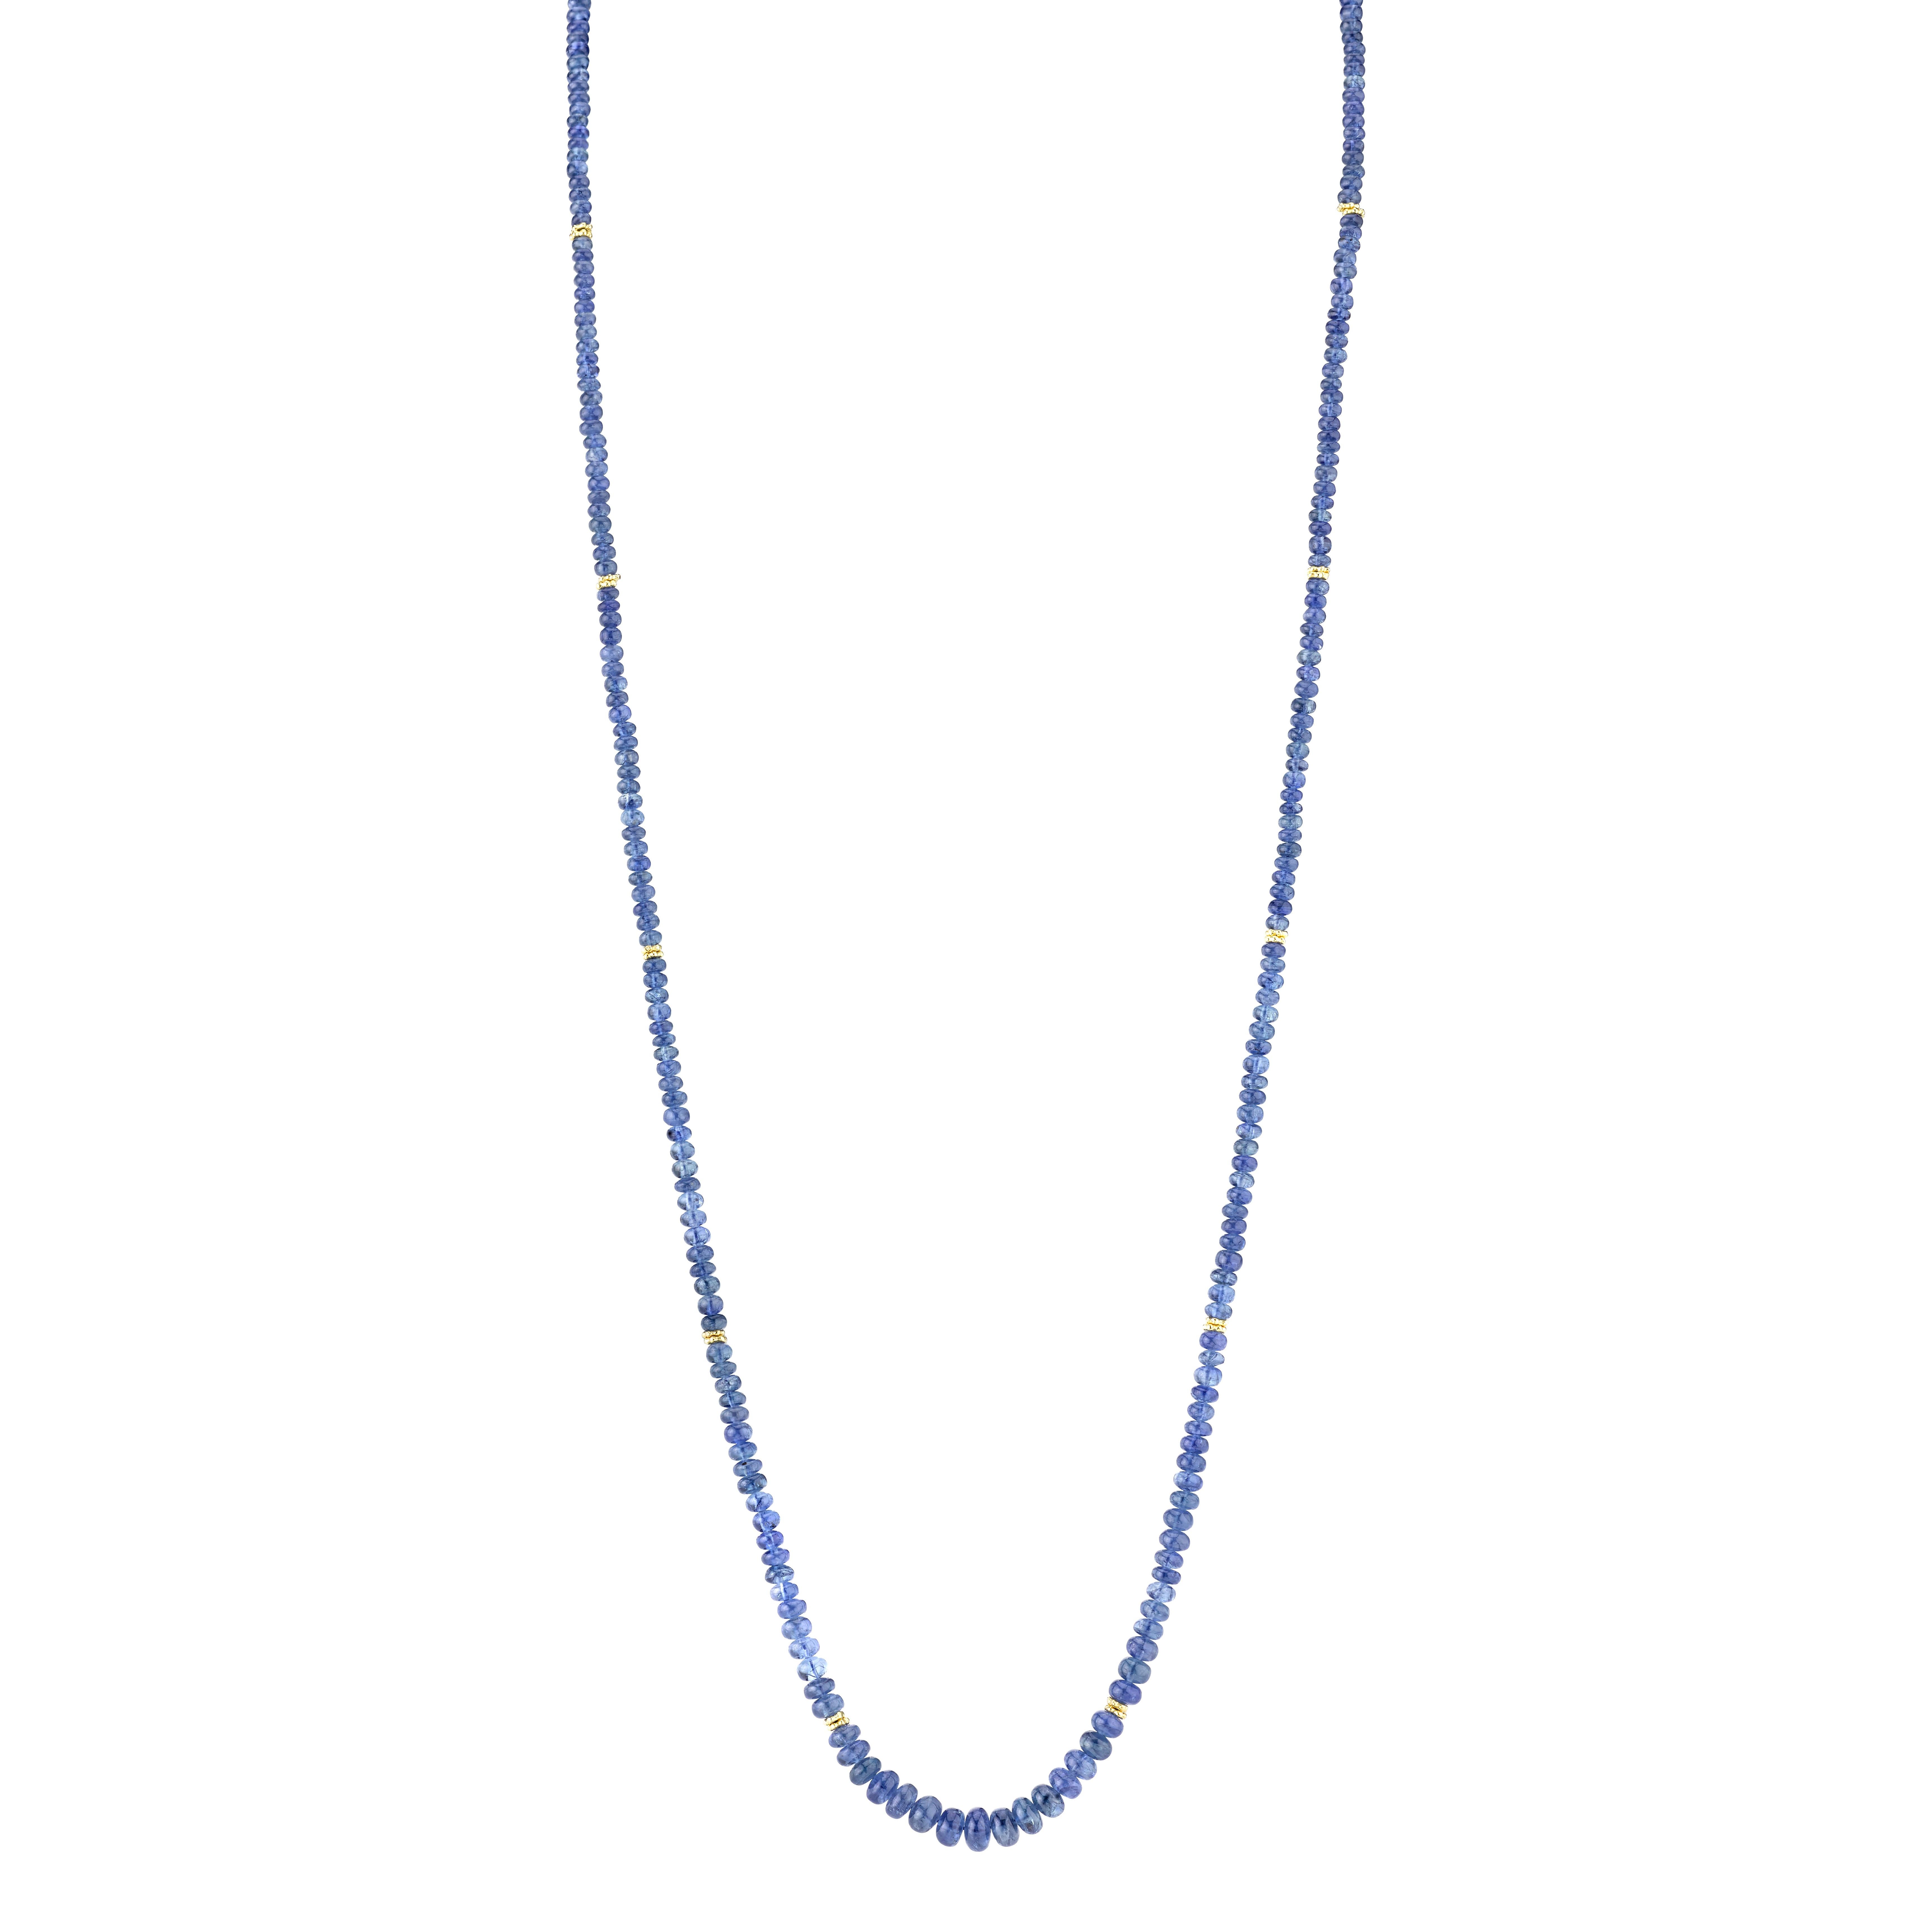 This extra long strand of natural blue sapphire beads features approximately 100 carats of graduated beads ranging in size from 1.25 to 5.00mm. The strand measures 37 inches, so it  can be worn as a single strand or doubled in several ways depending